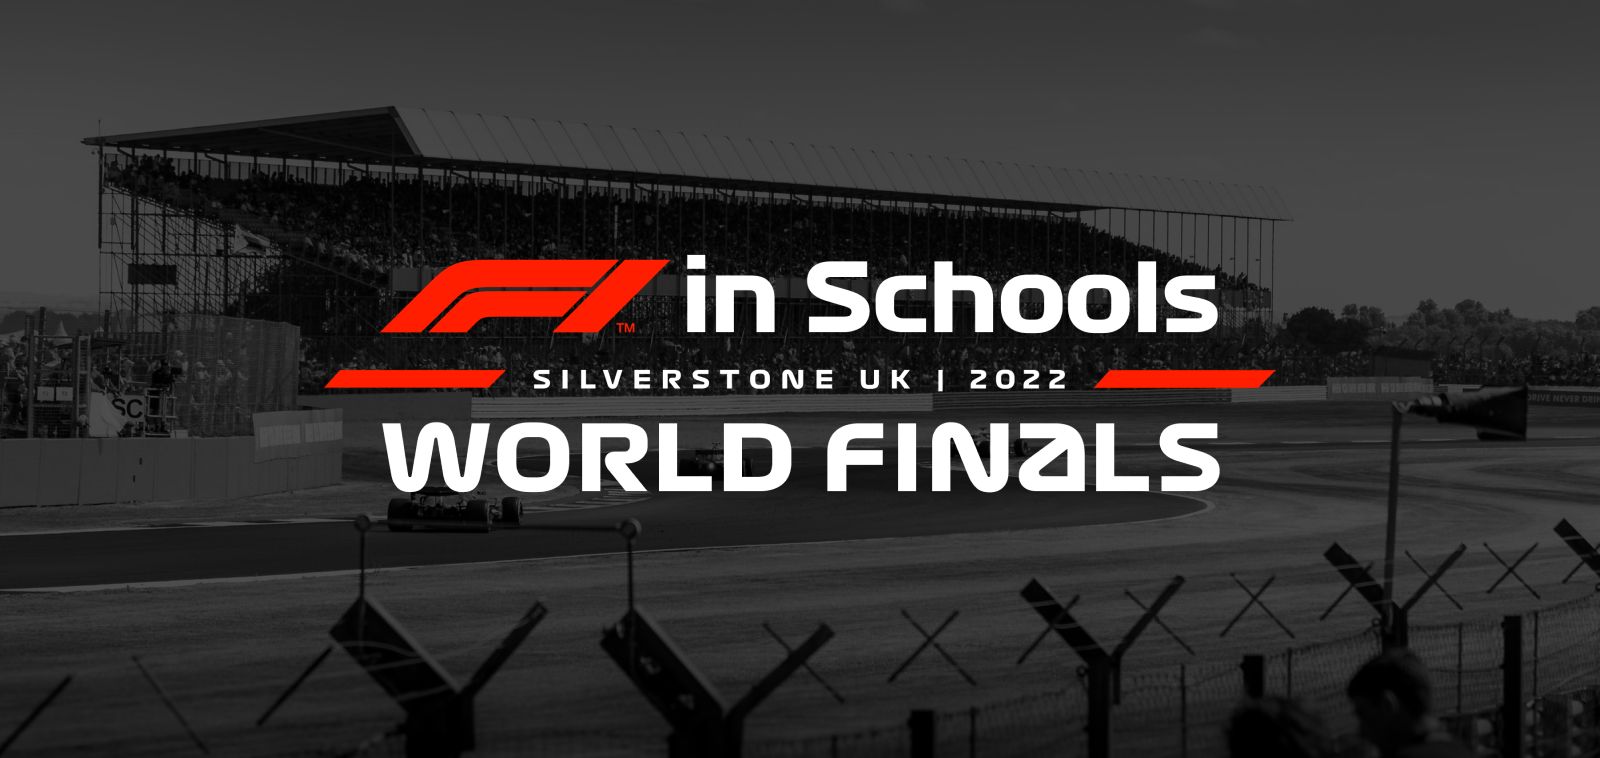 The 2022 F1 in Schools World Finals will be held at the Silverstone Circuit in the United Kingdom.